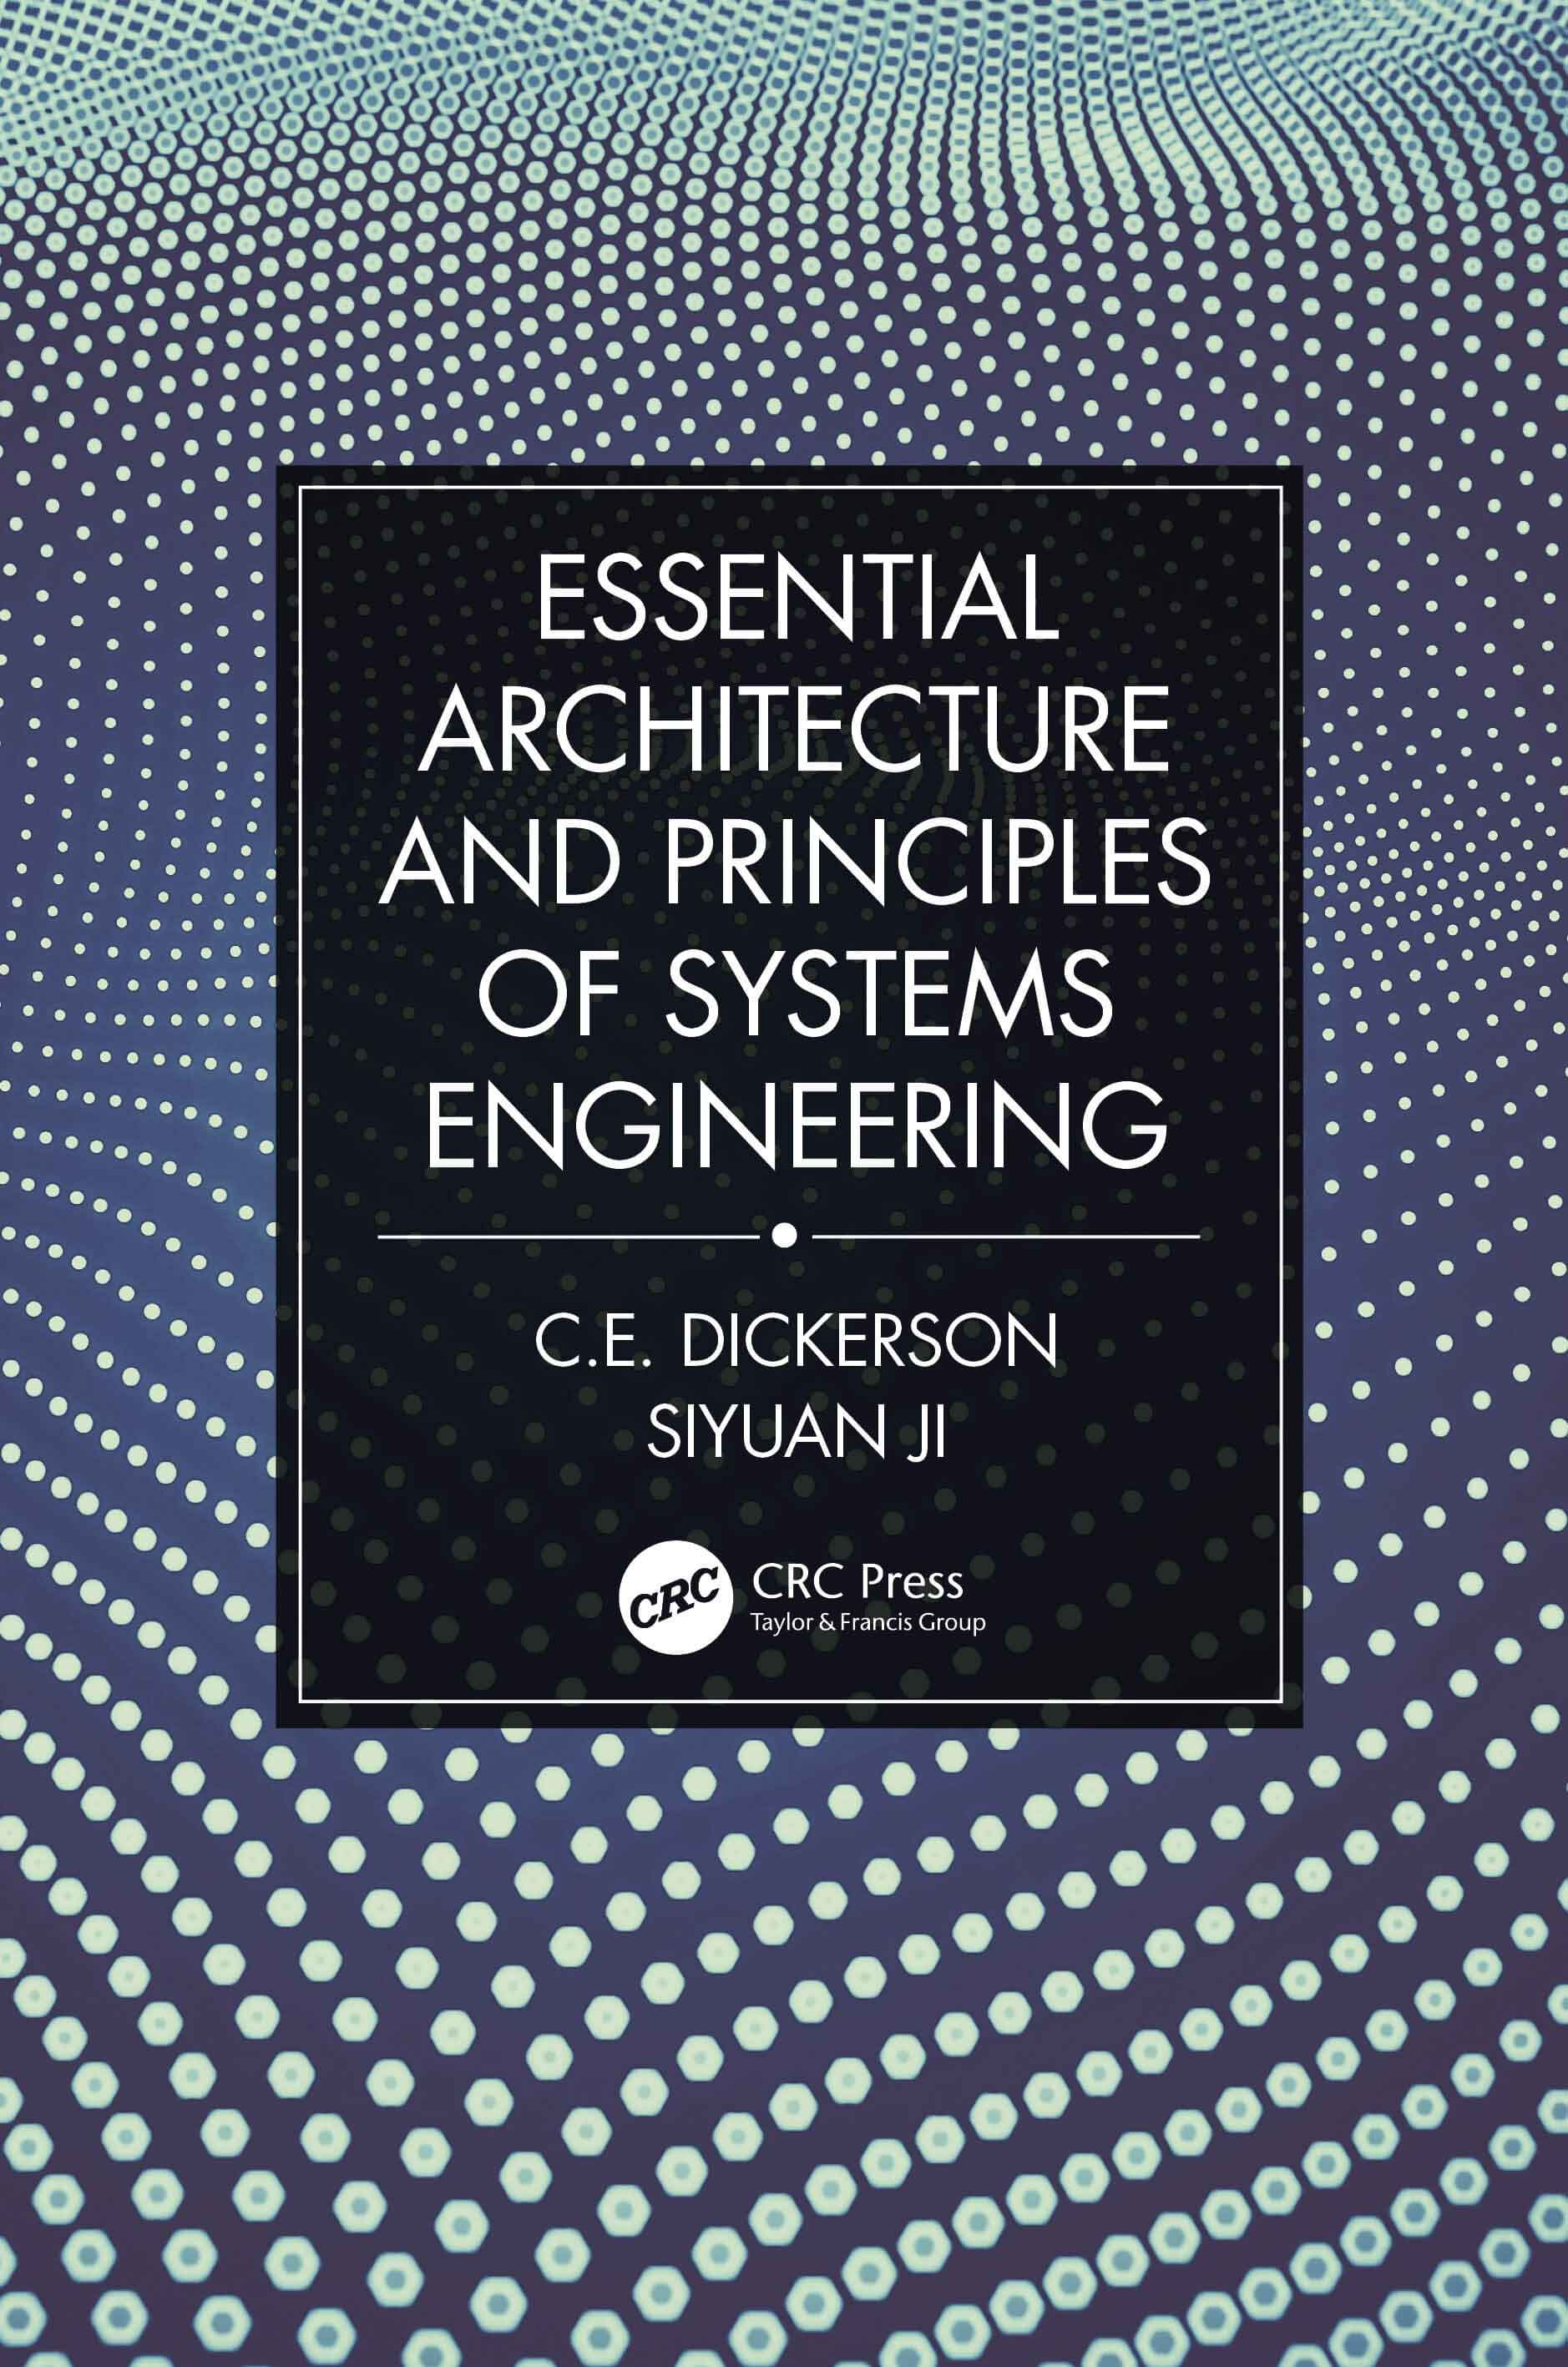 A book front cover that reads 'Essential Architecture and Principles of Systems Engineering' by C.E. Dickerson and Siyuan Ji